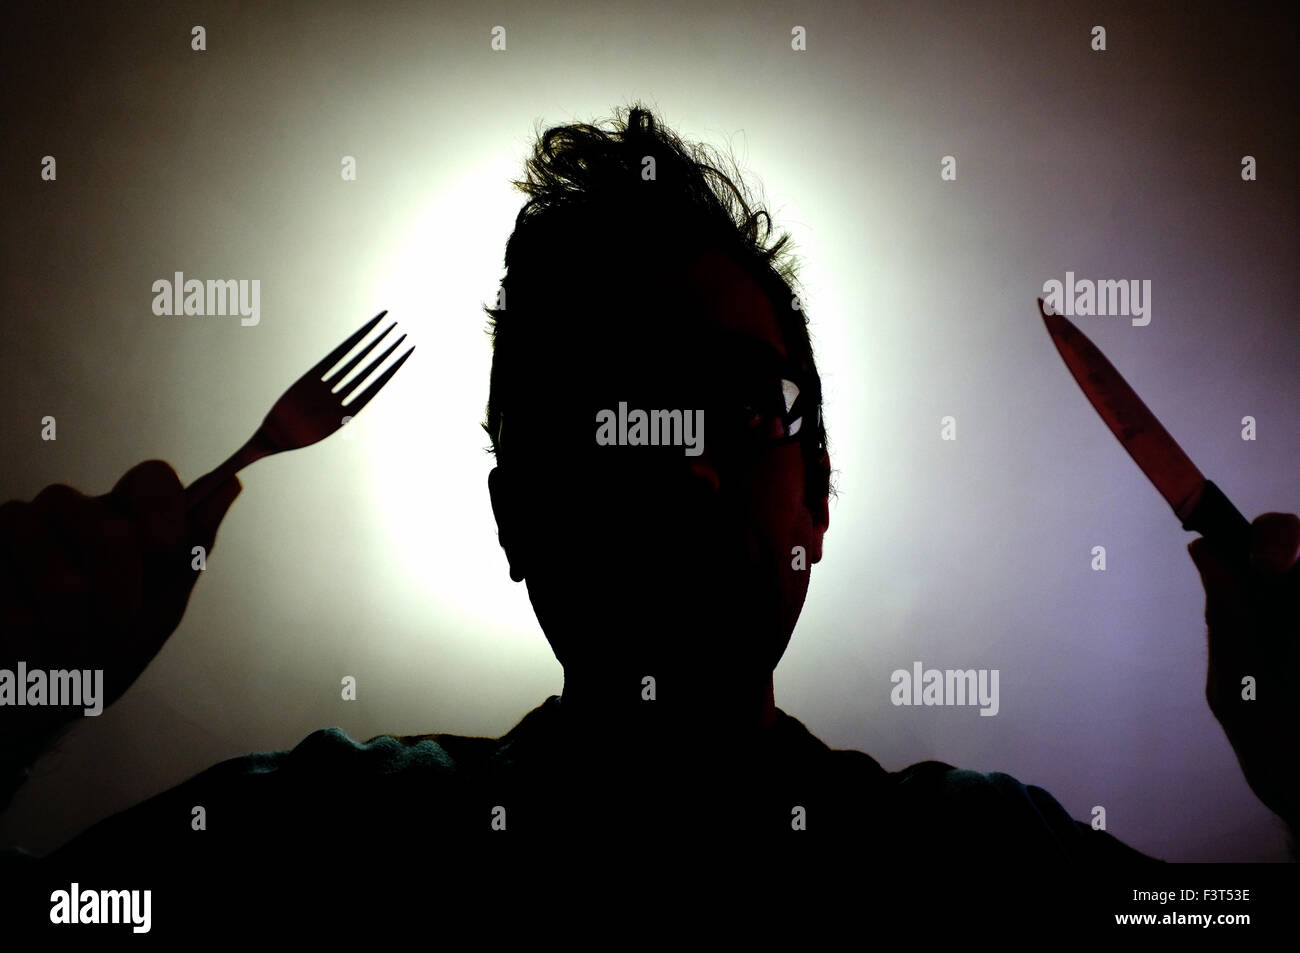 The silhouette of a man holding a knife and a fork. Stock Photo